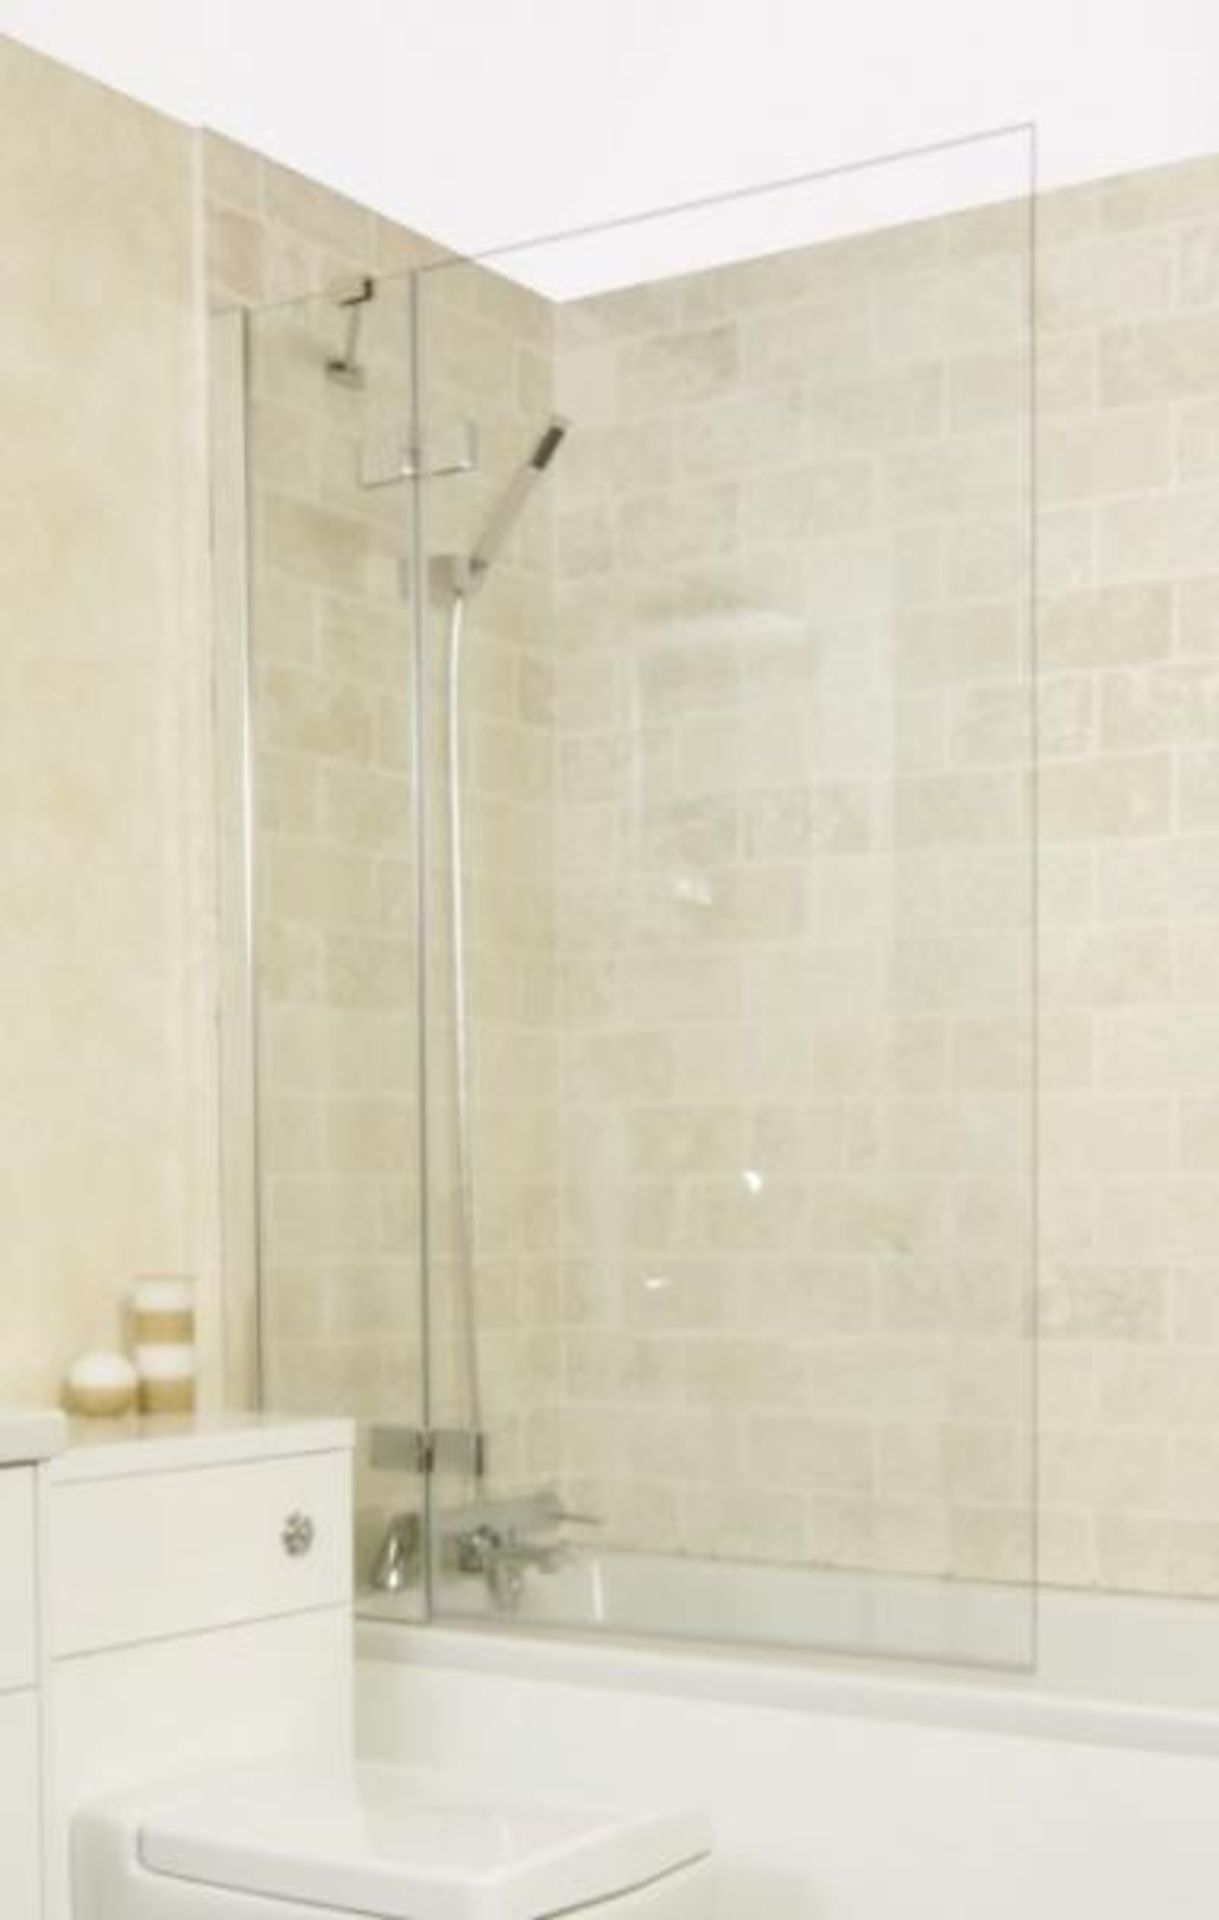 Dovcor Tolima Bath Shower screen, new and boxed, RRP £405